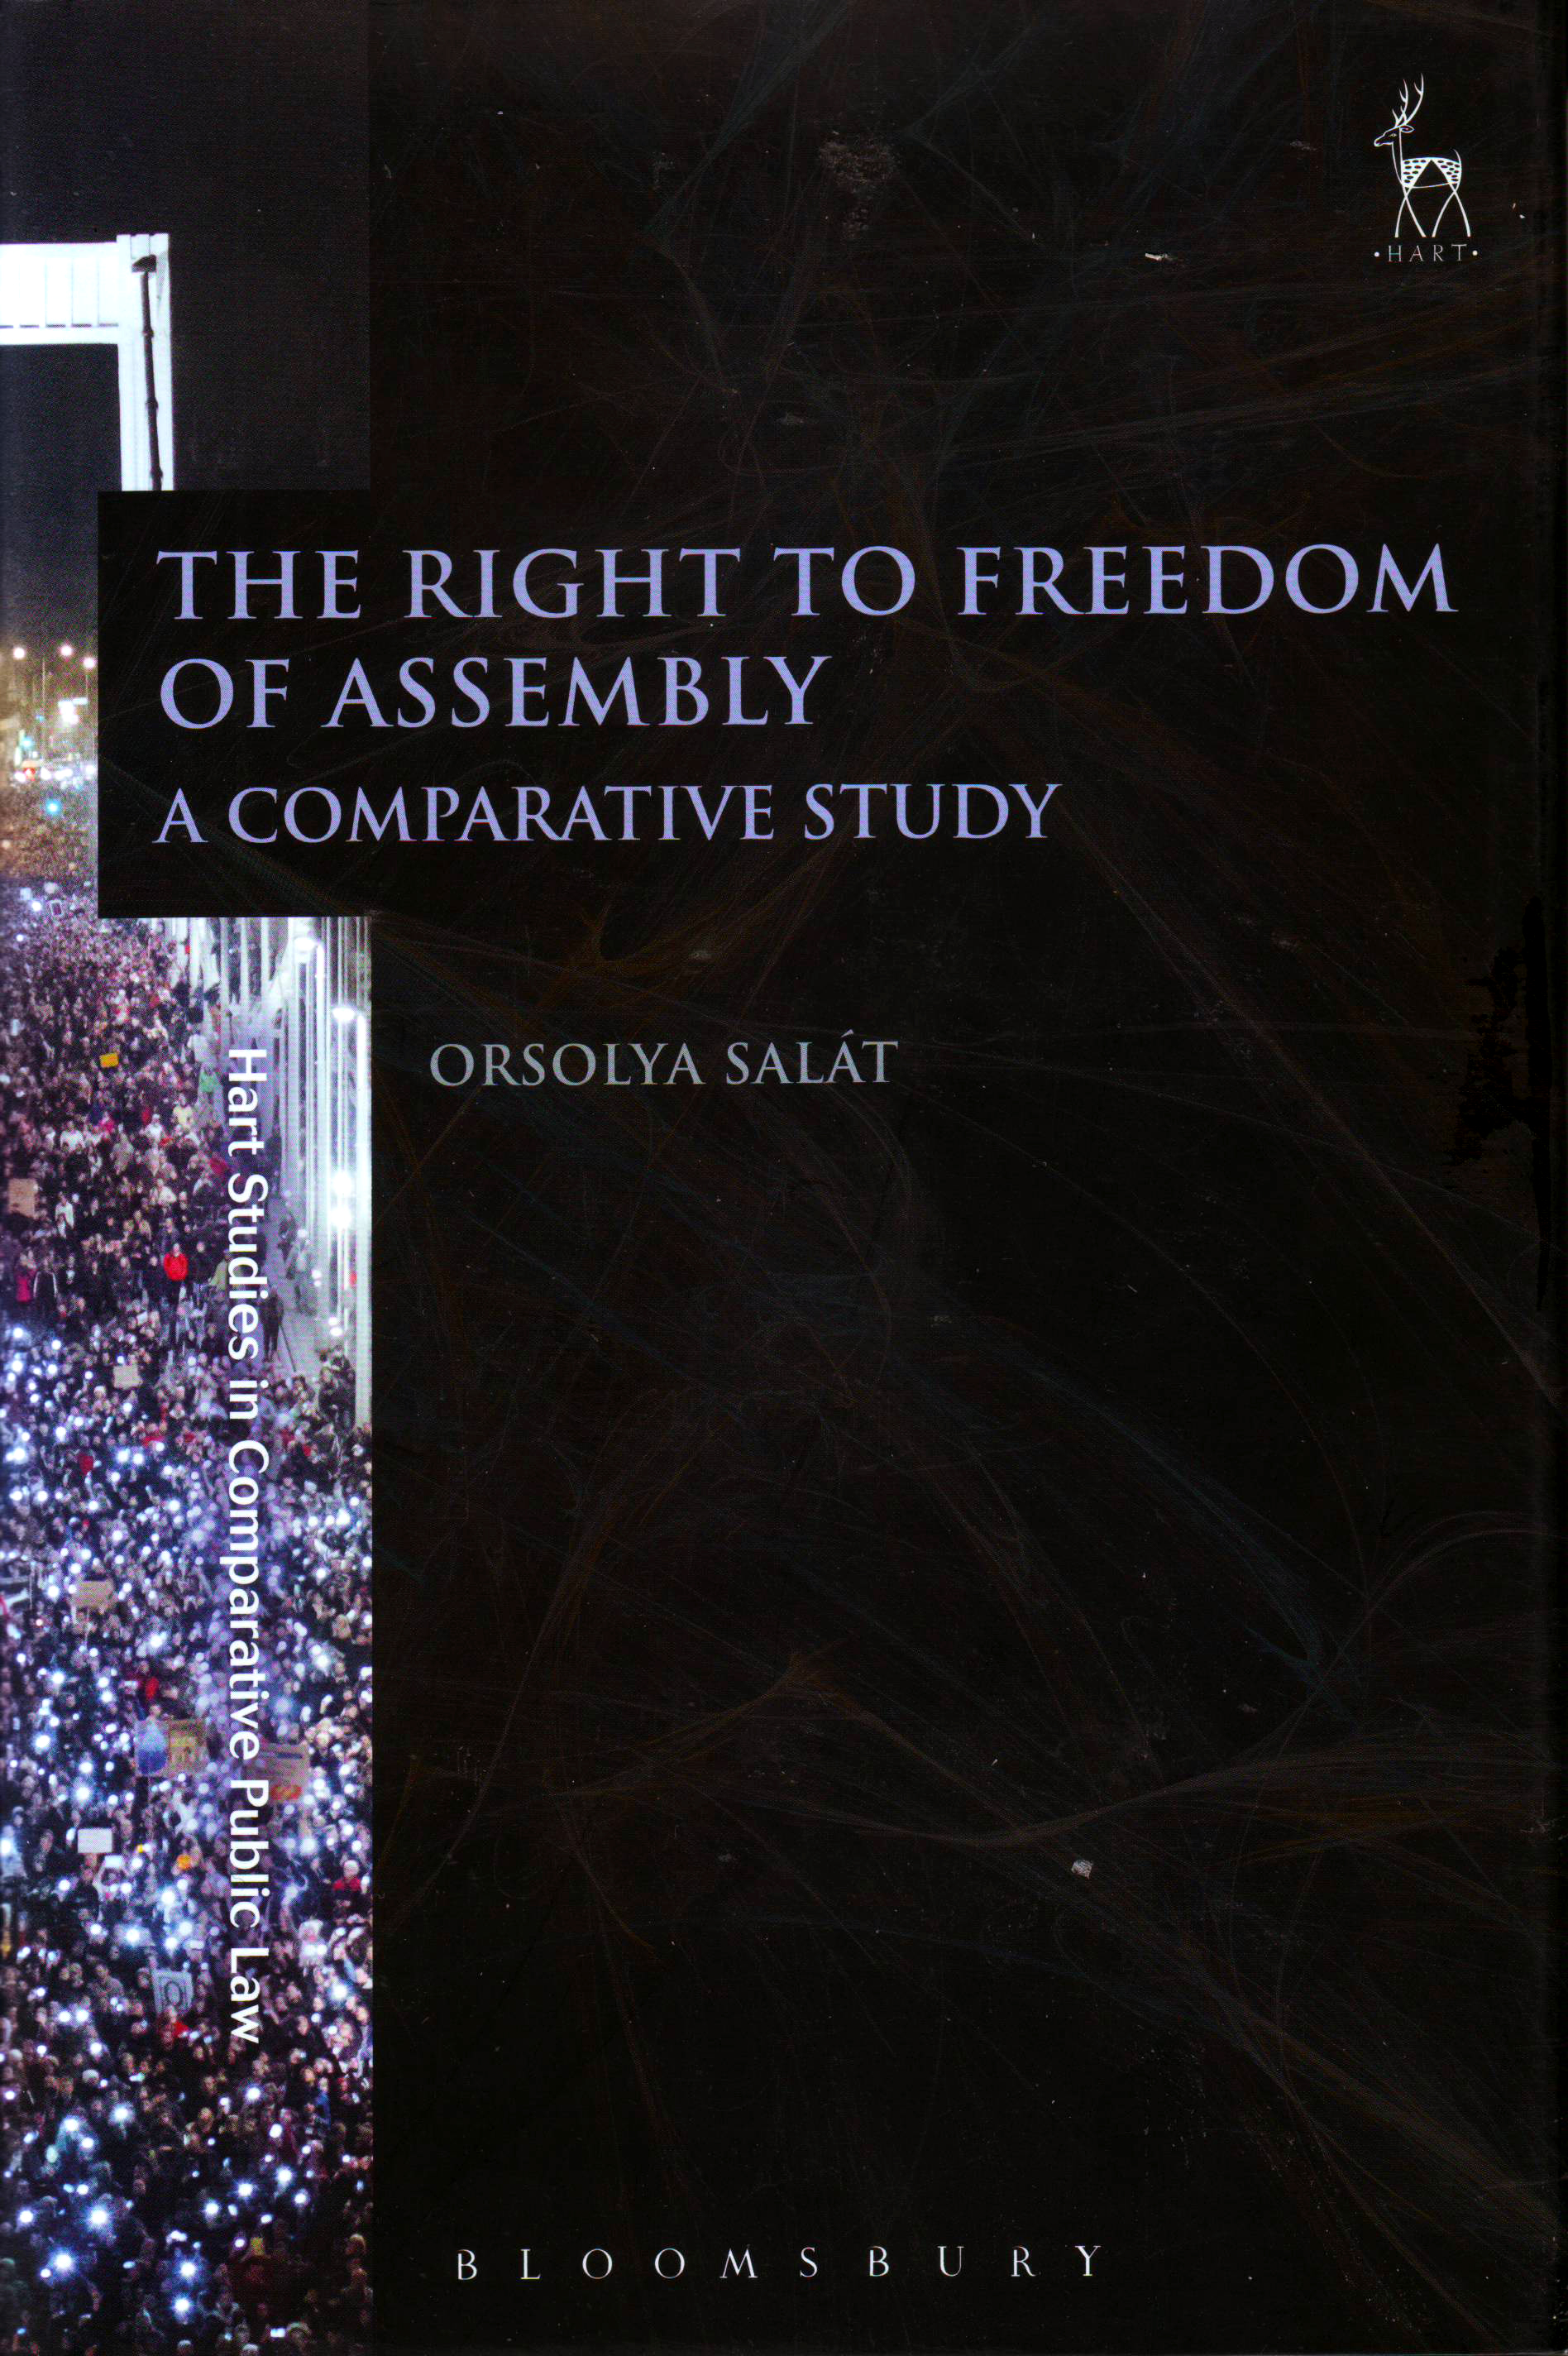 The Right to Freedom of Assembly: A comparative study